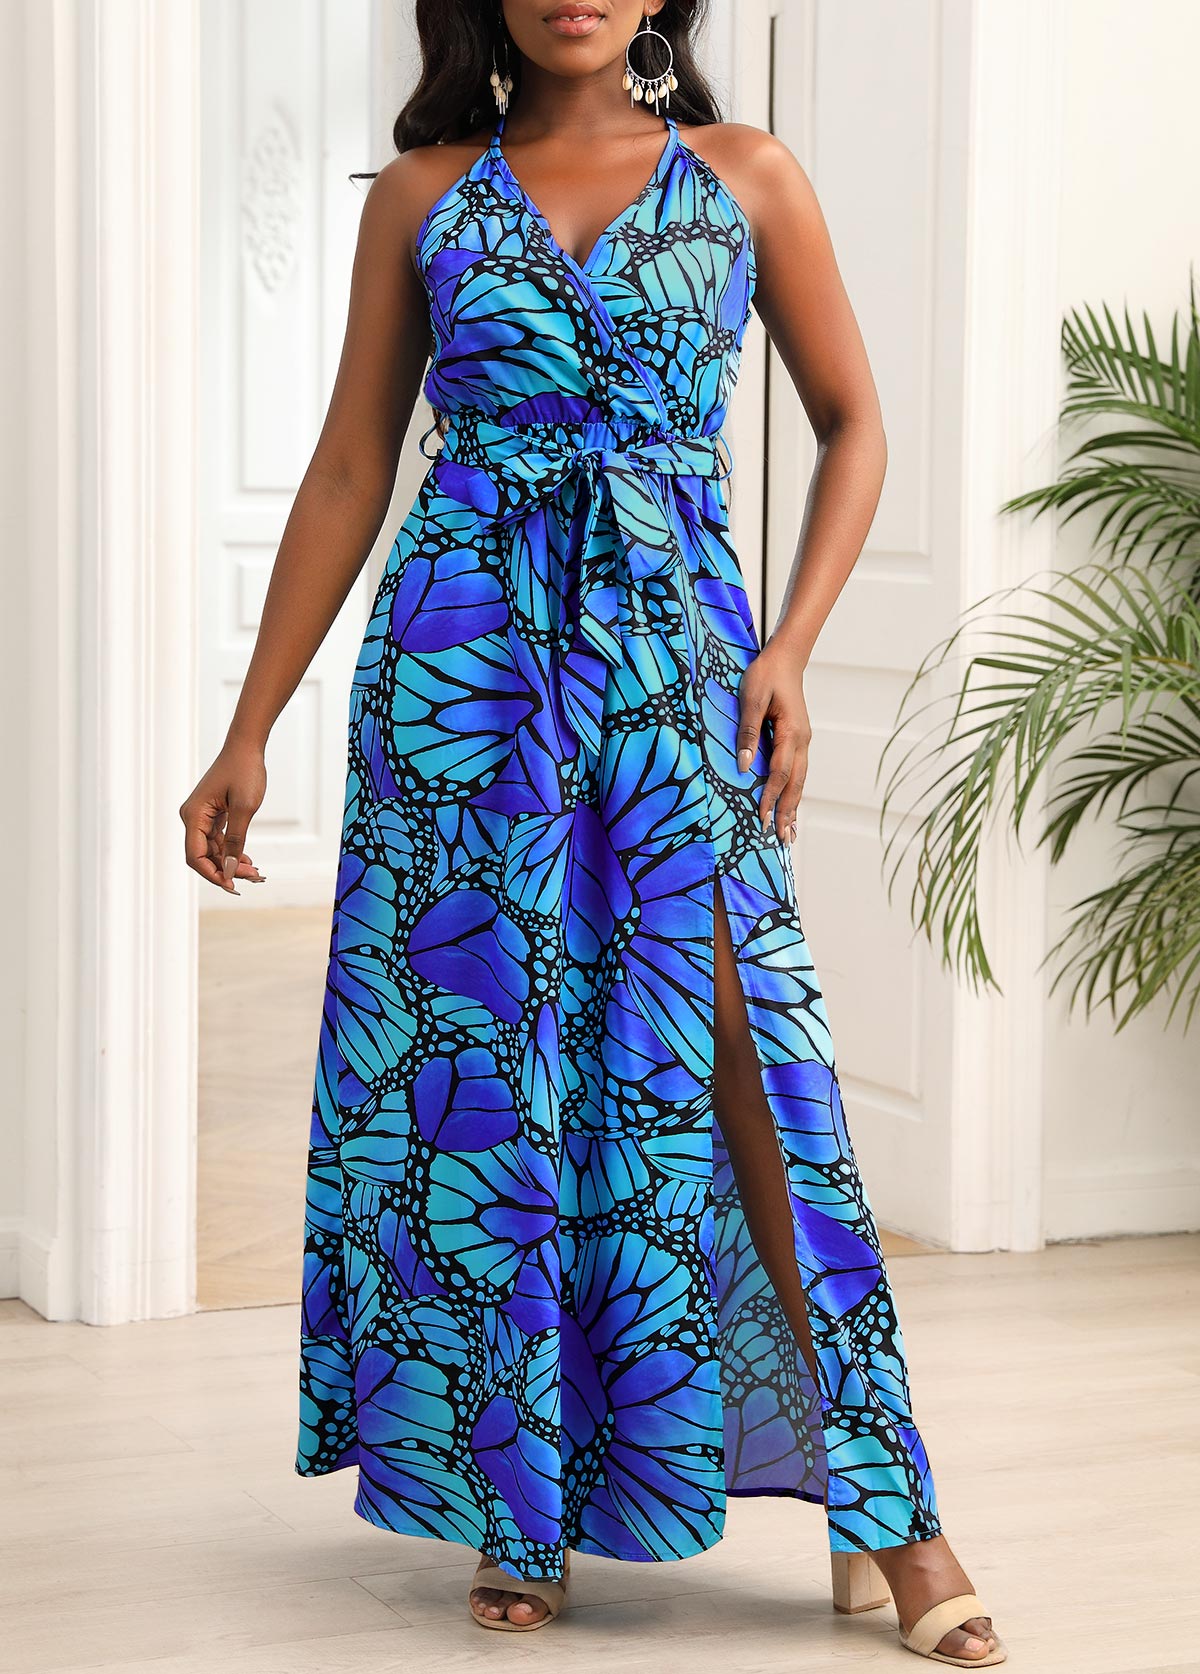 Blue Belted Butterfly Print Spaghetti Strap Dress